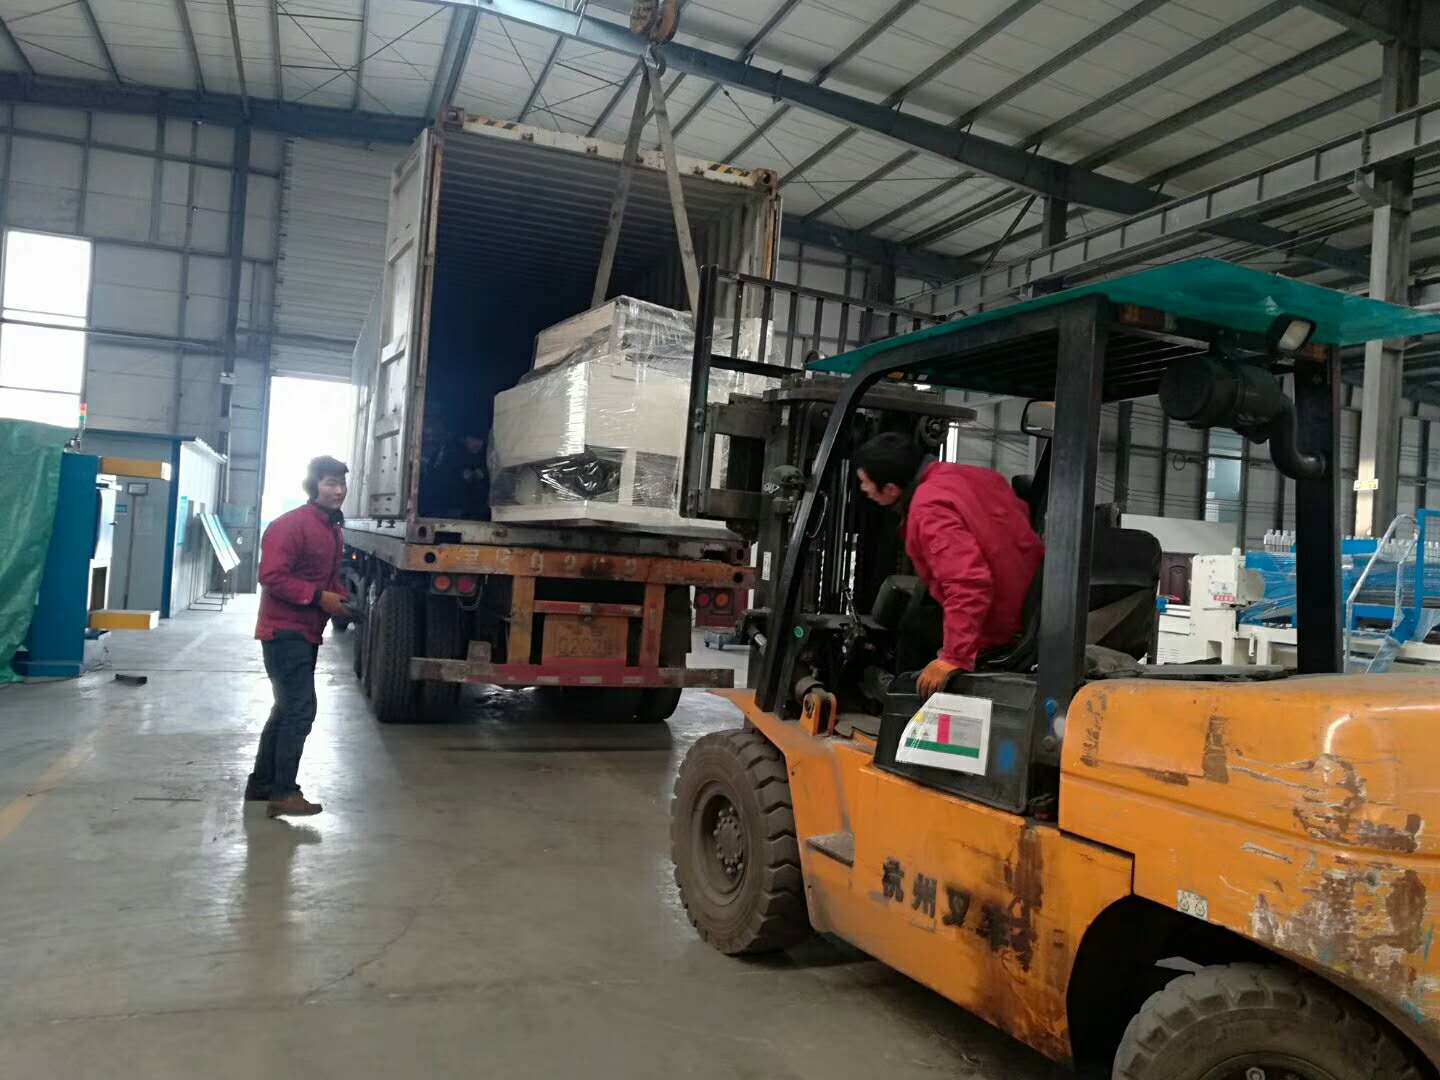 The Last Time for Shipments of the Wire Mesh Welding Machine of Secure-Nett Factory